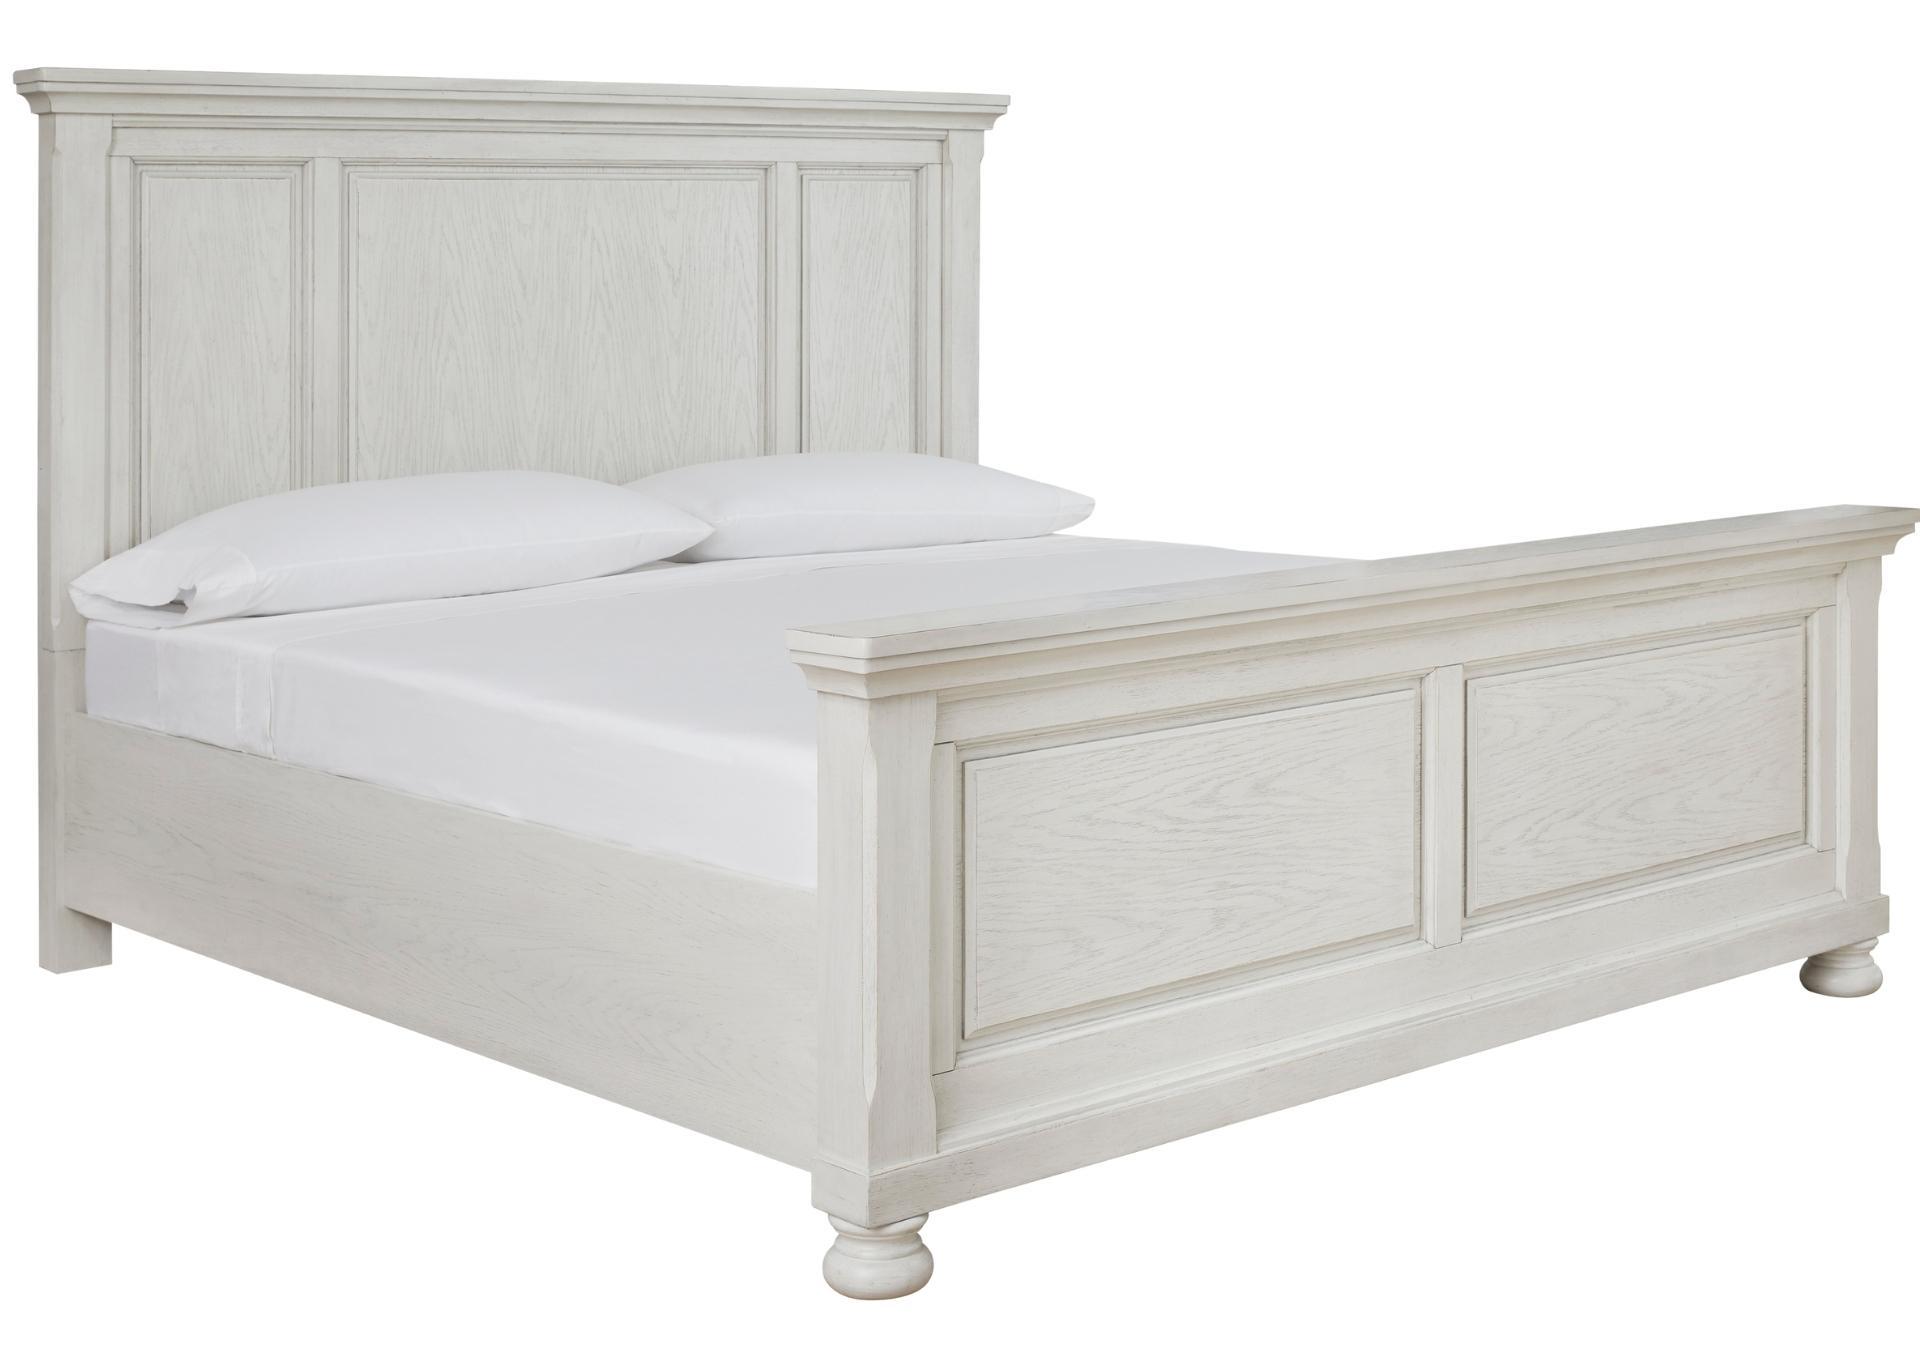 ROBBINSDALE QUEEN PANEL BED,ASHLEY FURNITURE INC.